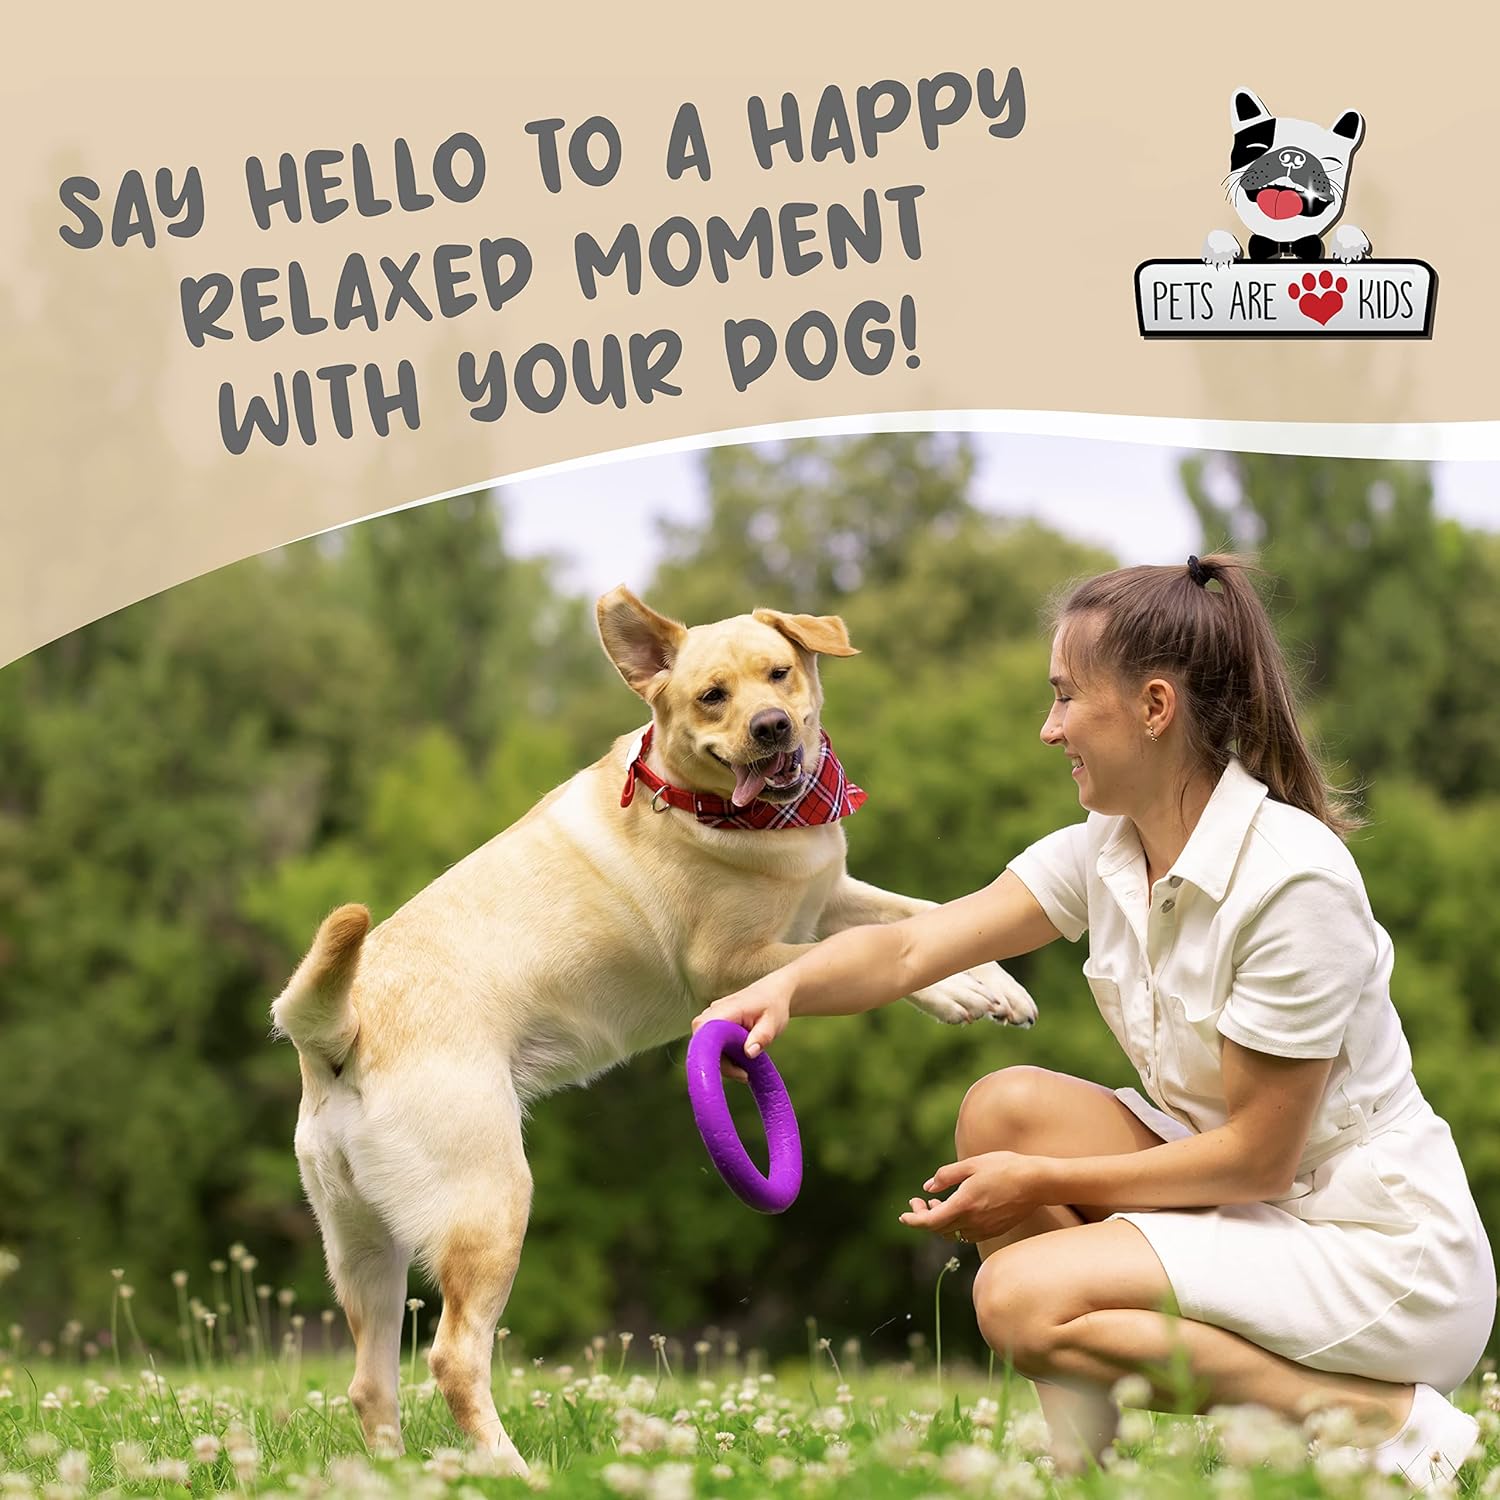 Say hello to a happy relaxed moment with your dog